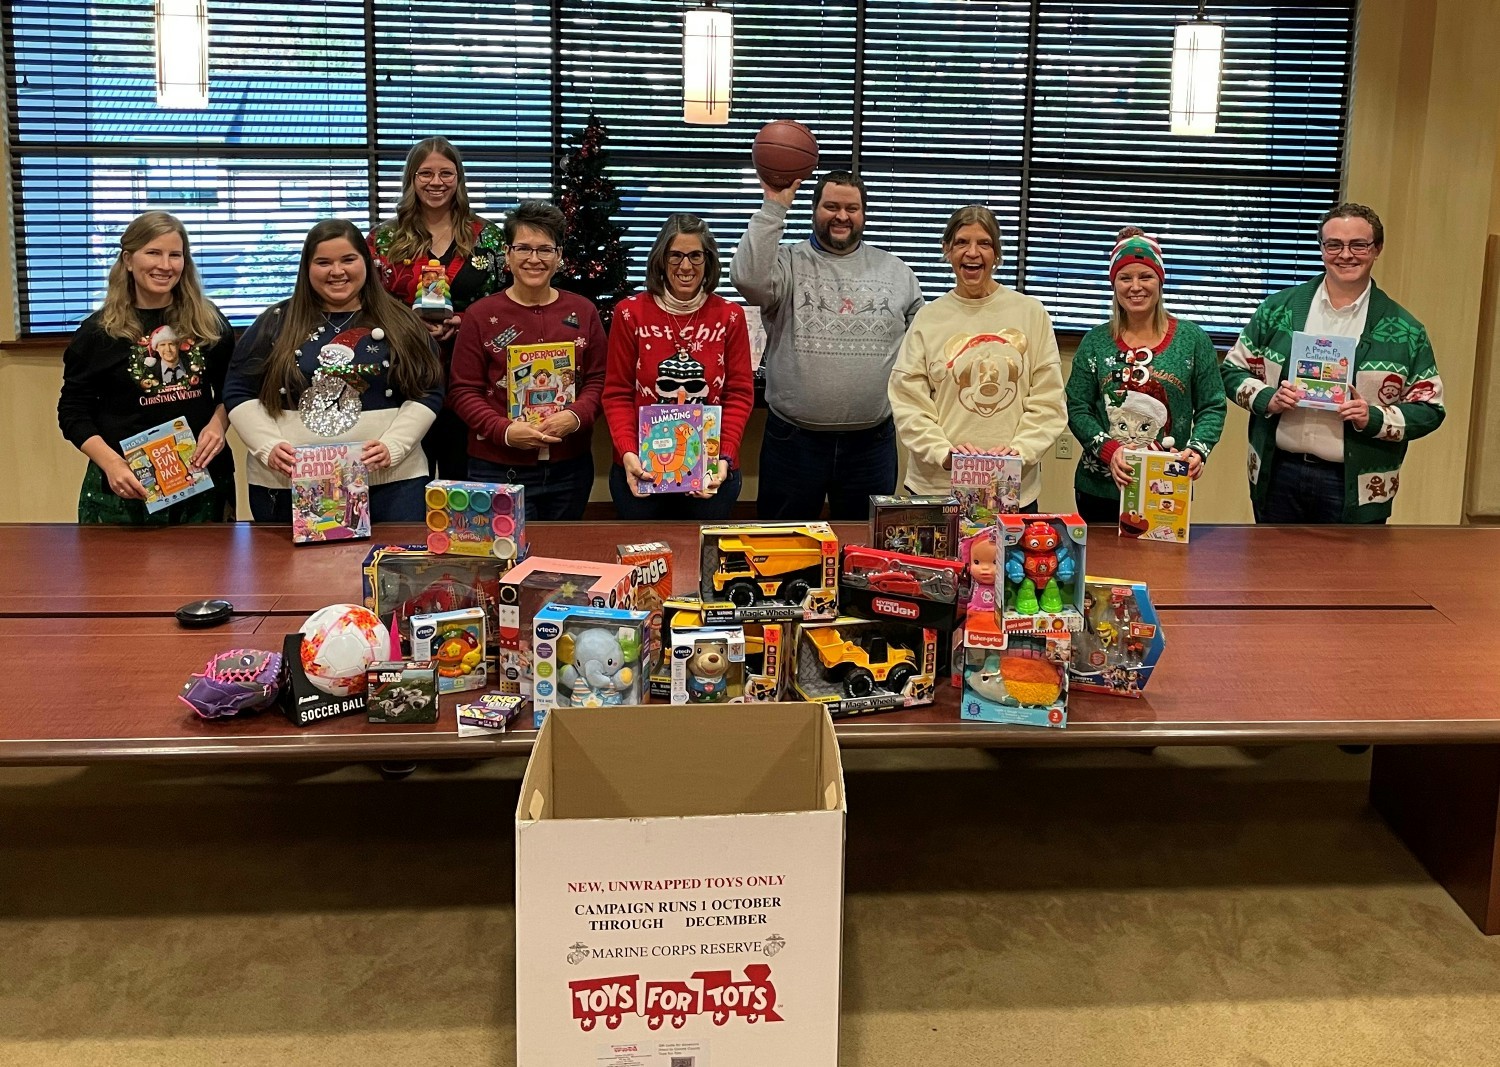 With a joyous spirit, staff members collect gifts for Toys for Tots.